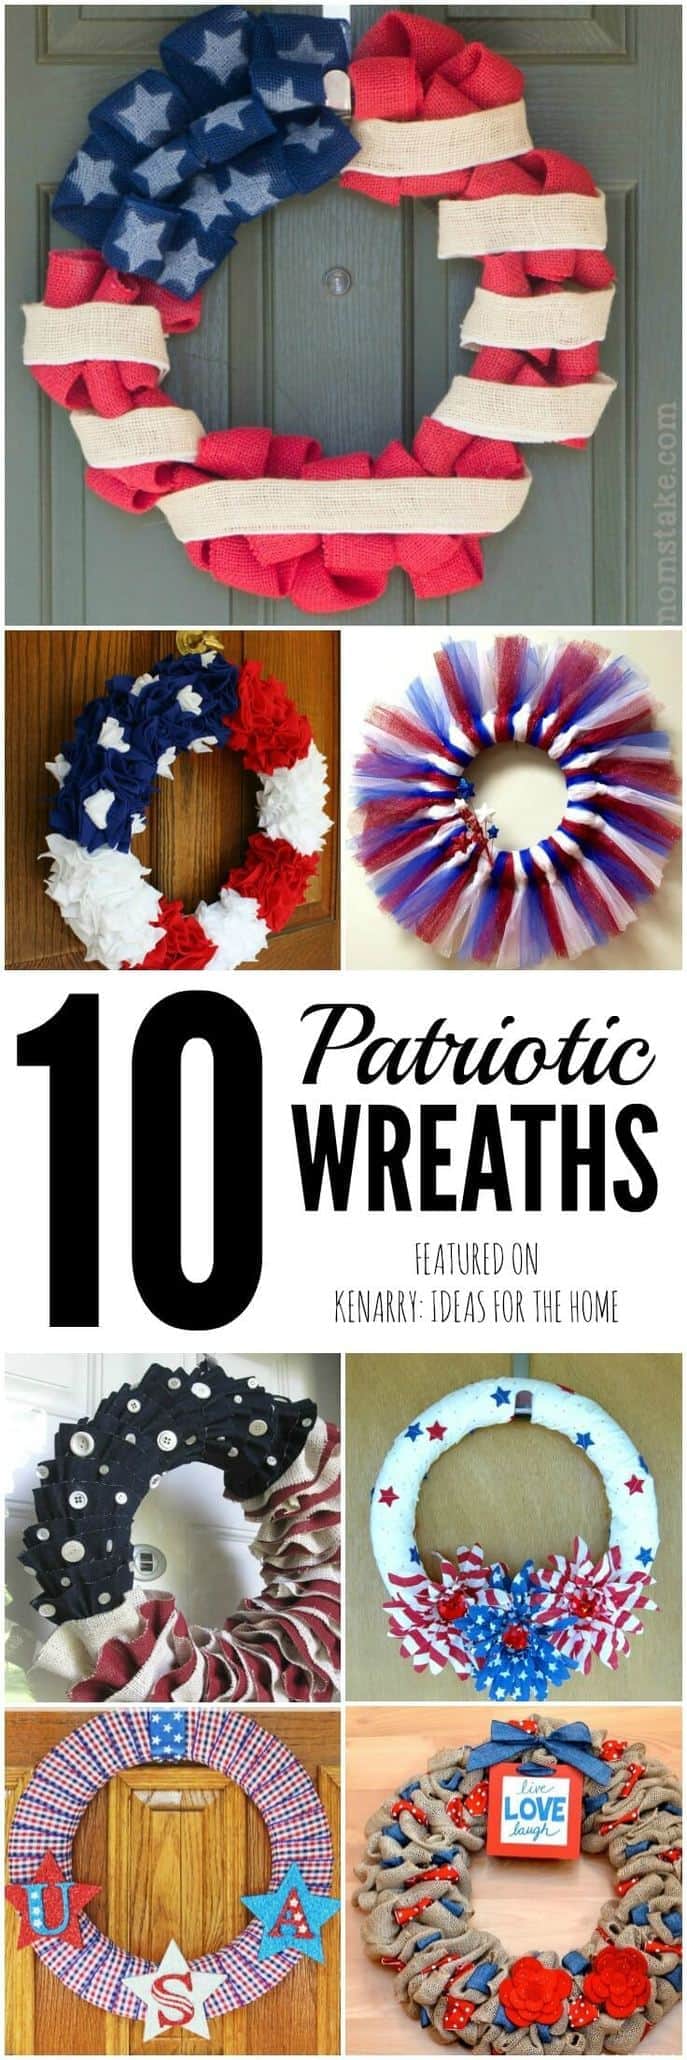 These 10 great ideas for 4th of July Wreaths would be beautiful to decorate your front door for Independence Day -- plus Memorial Day and Labor Day too! Have fun making these patriotic red, white and blue crafts.